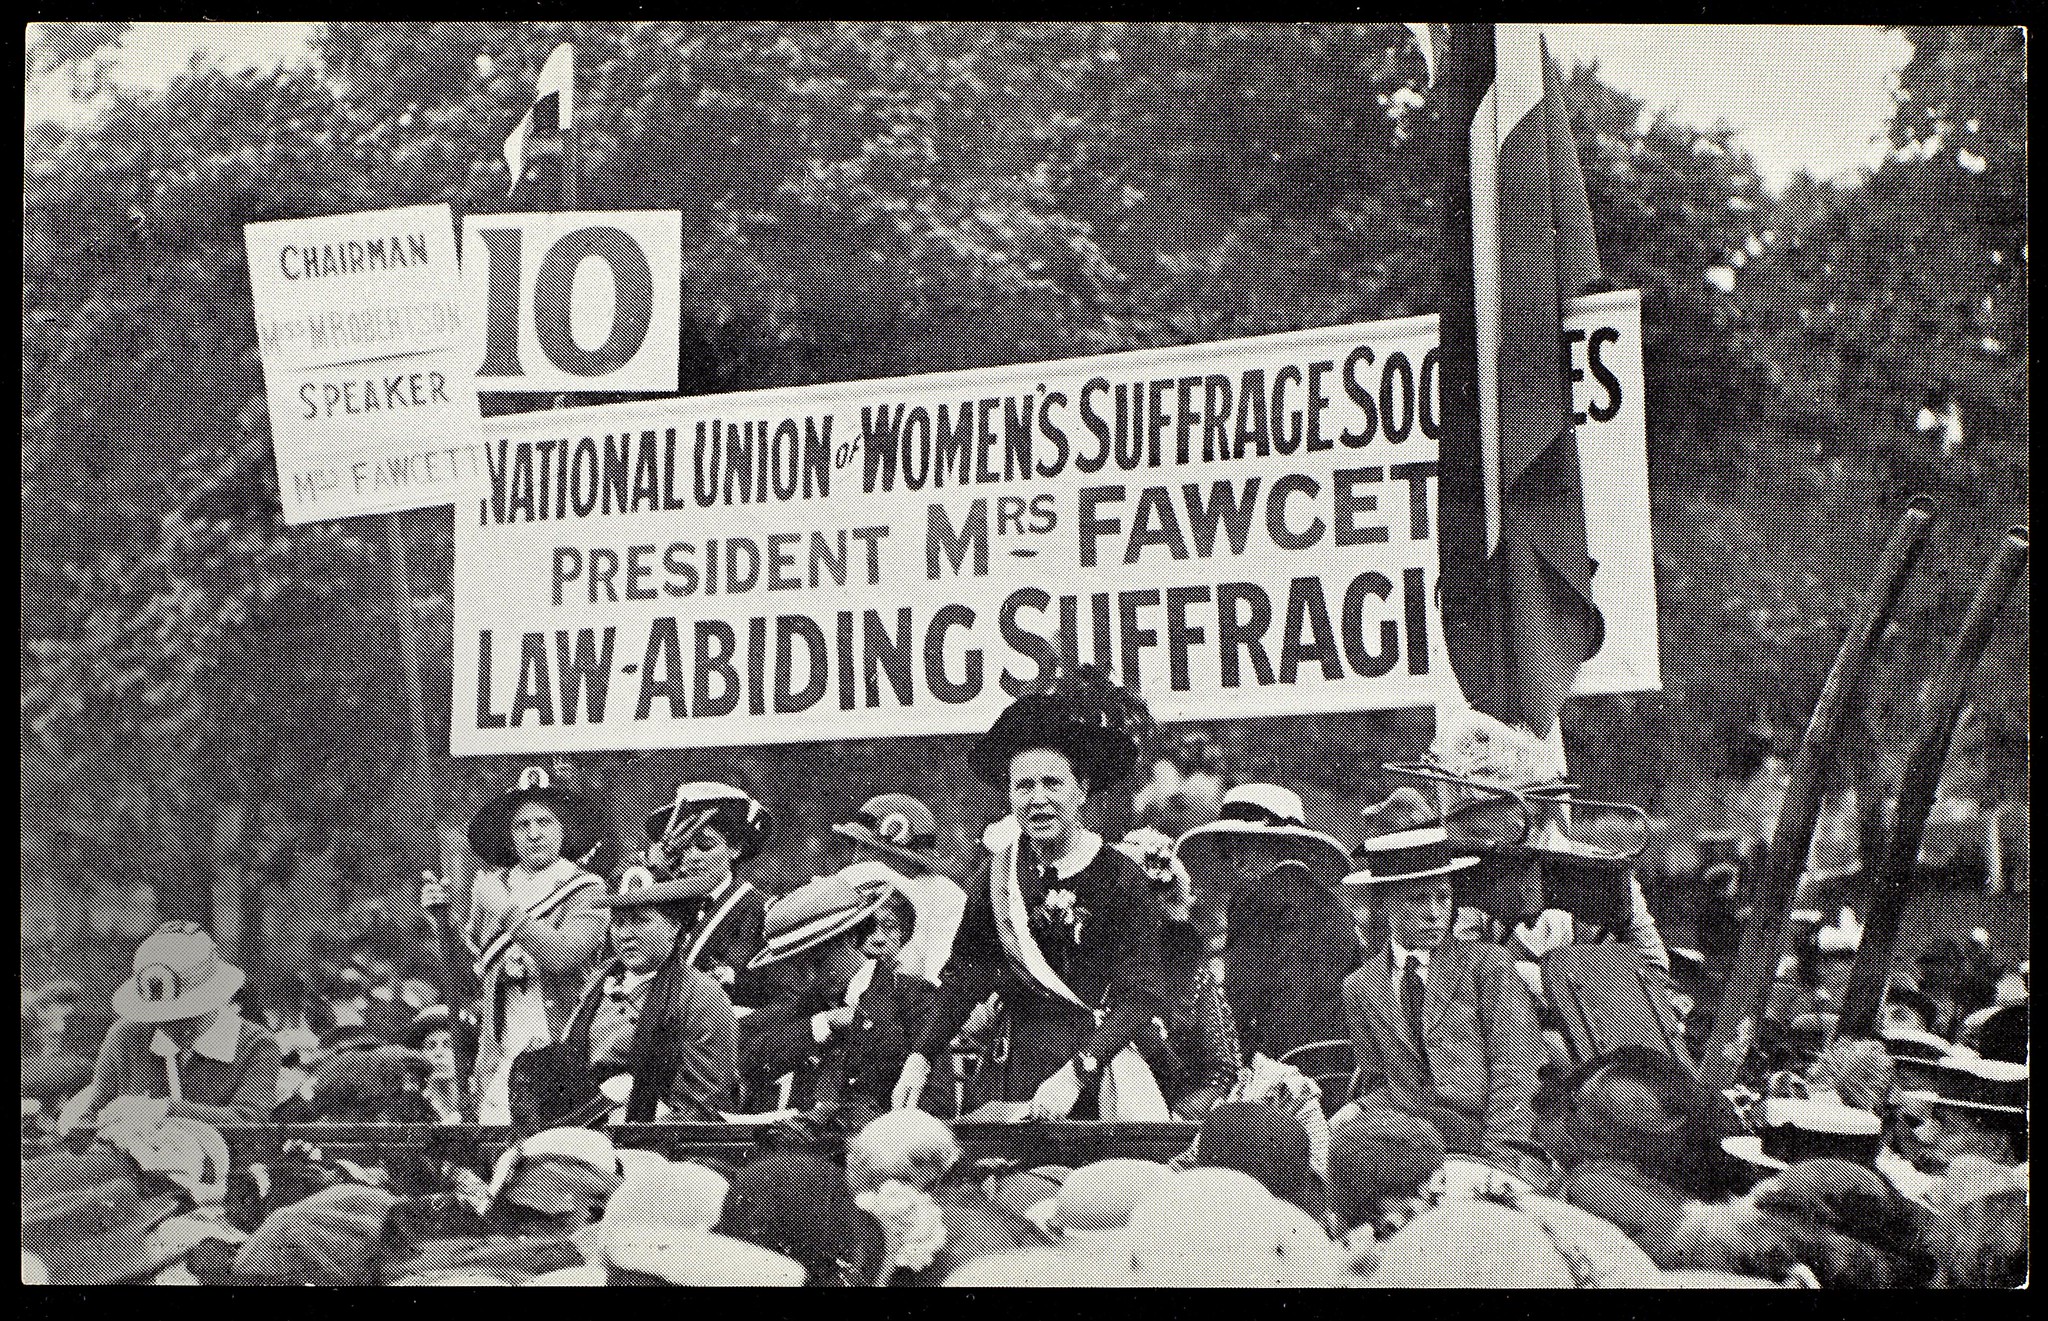 women riding on a float with a large sign during a protest